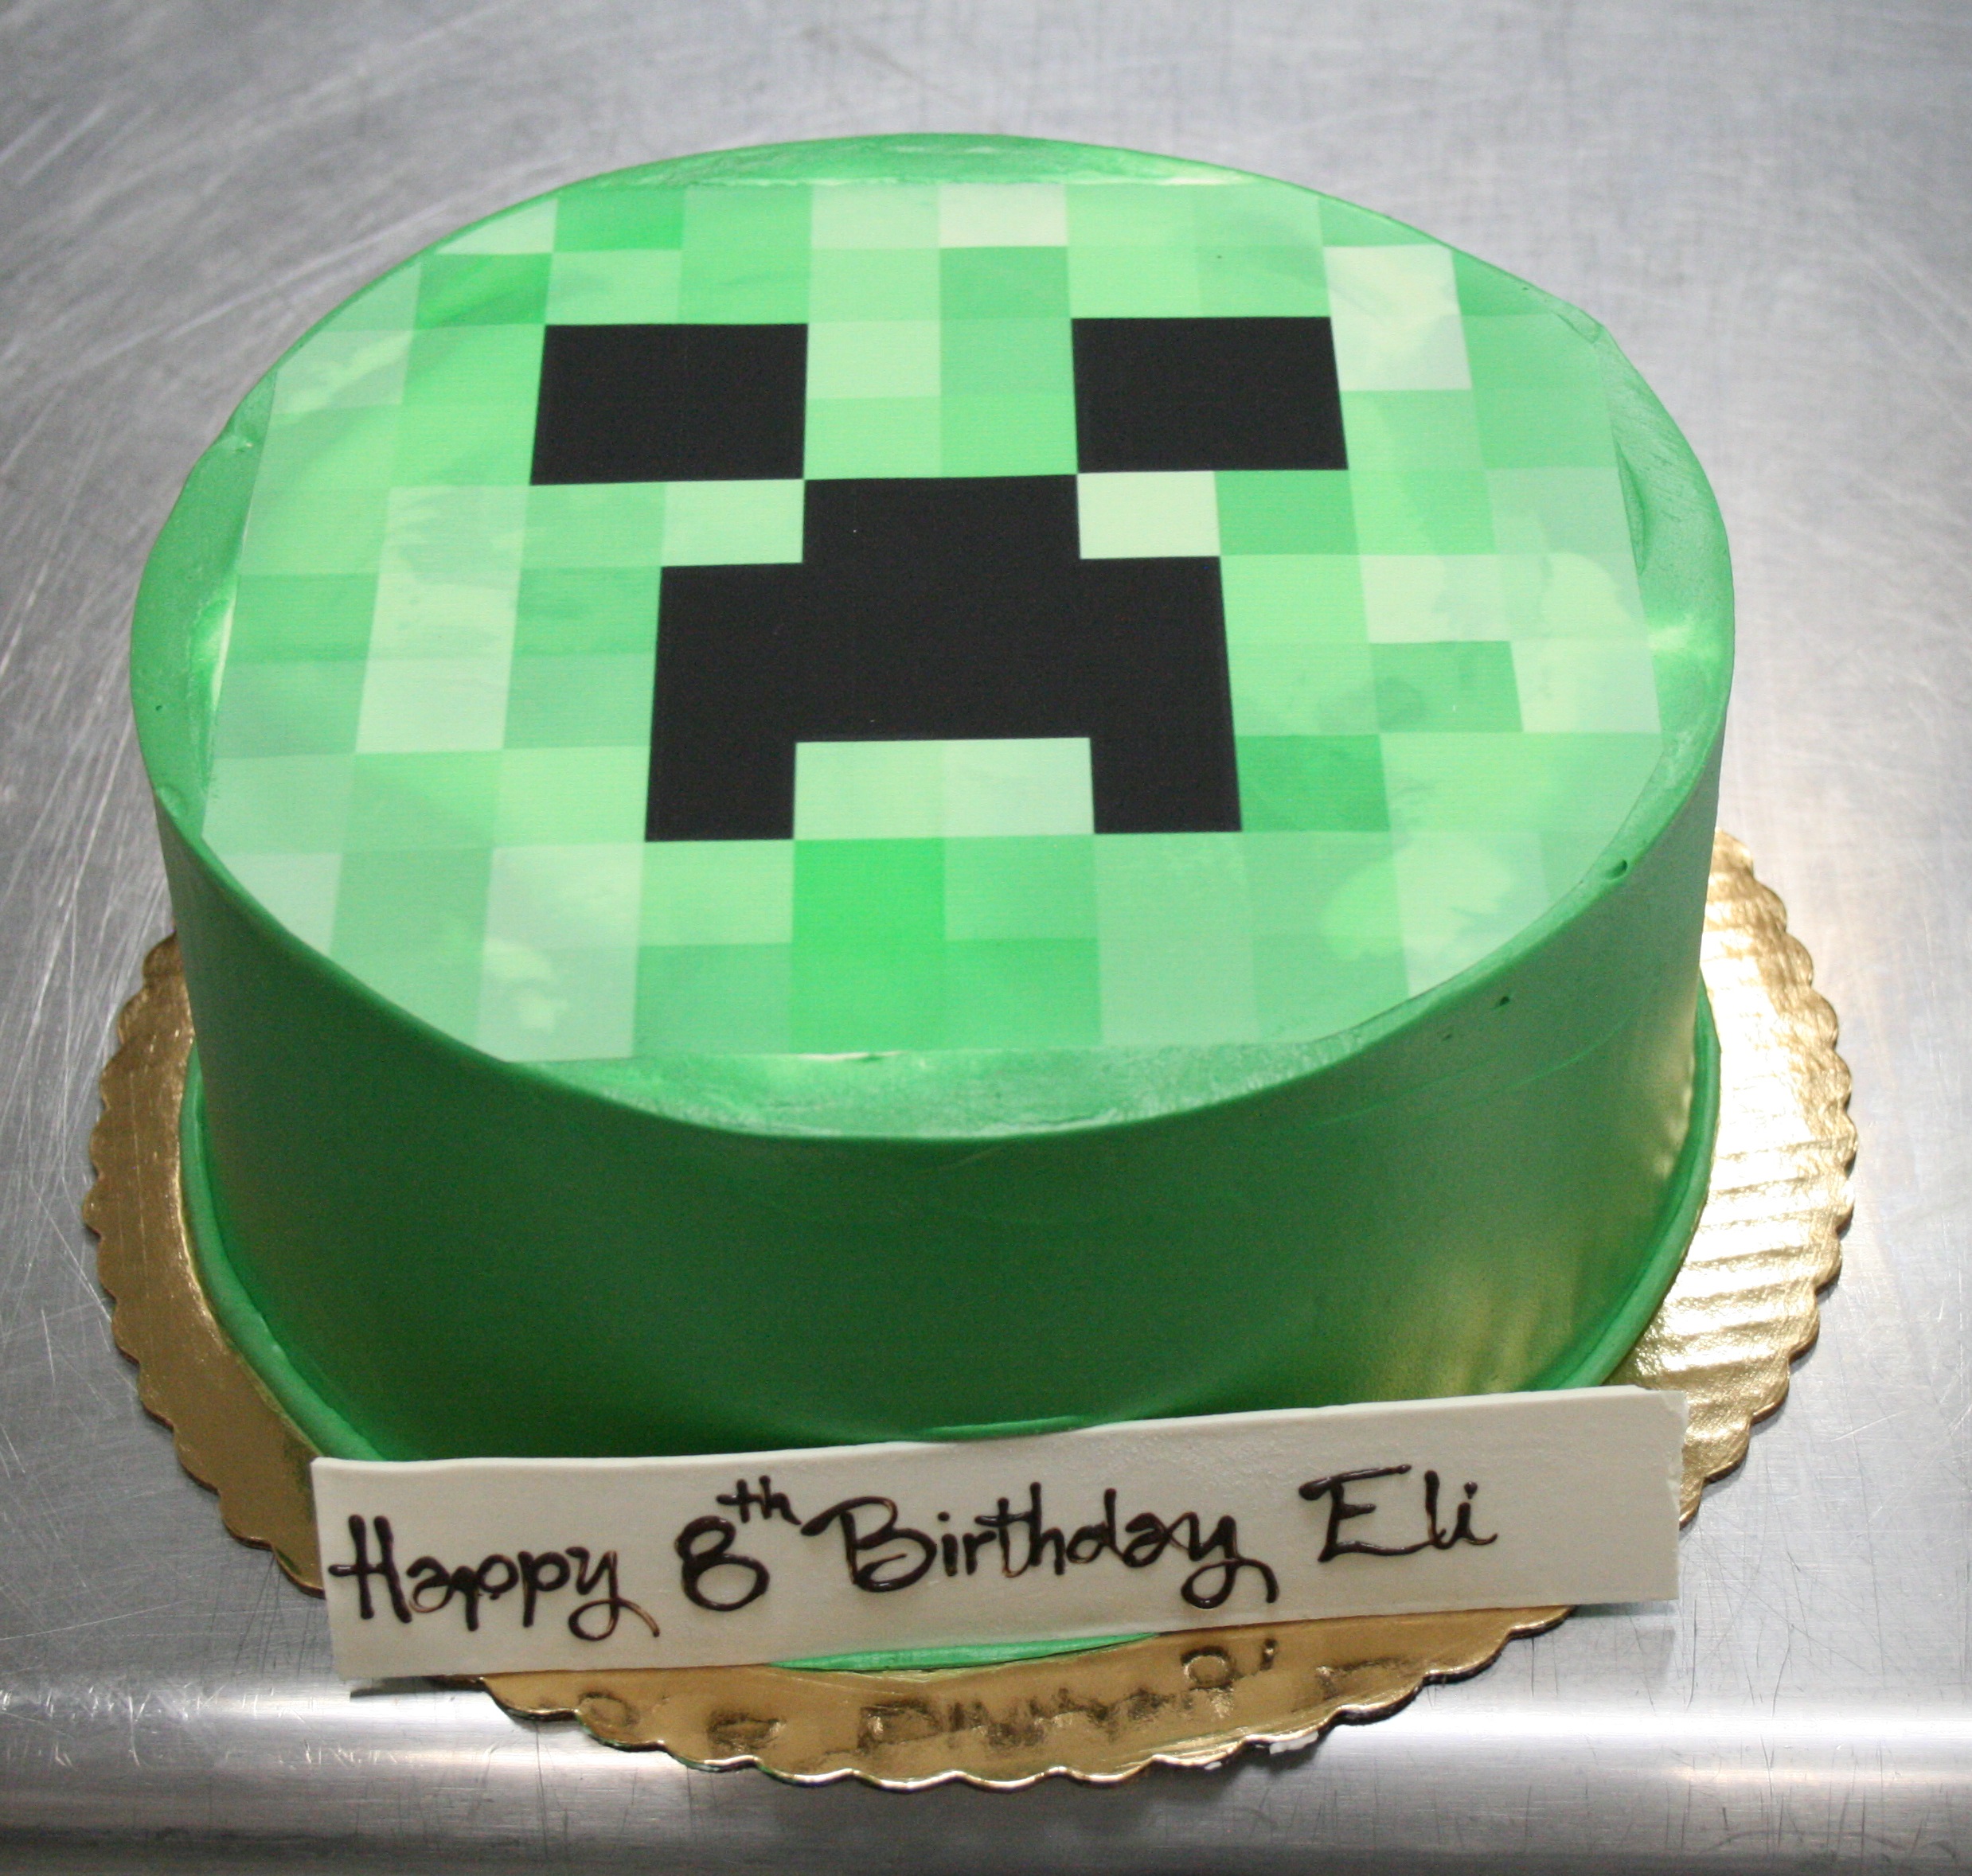 Minecraft Creeper Face Green Edible Cake Topper Image ABPID27364 – A  Birthday Place